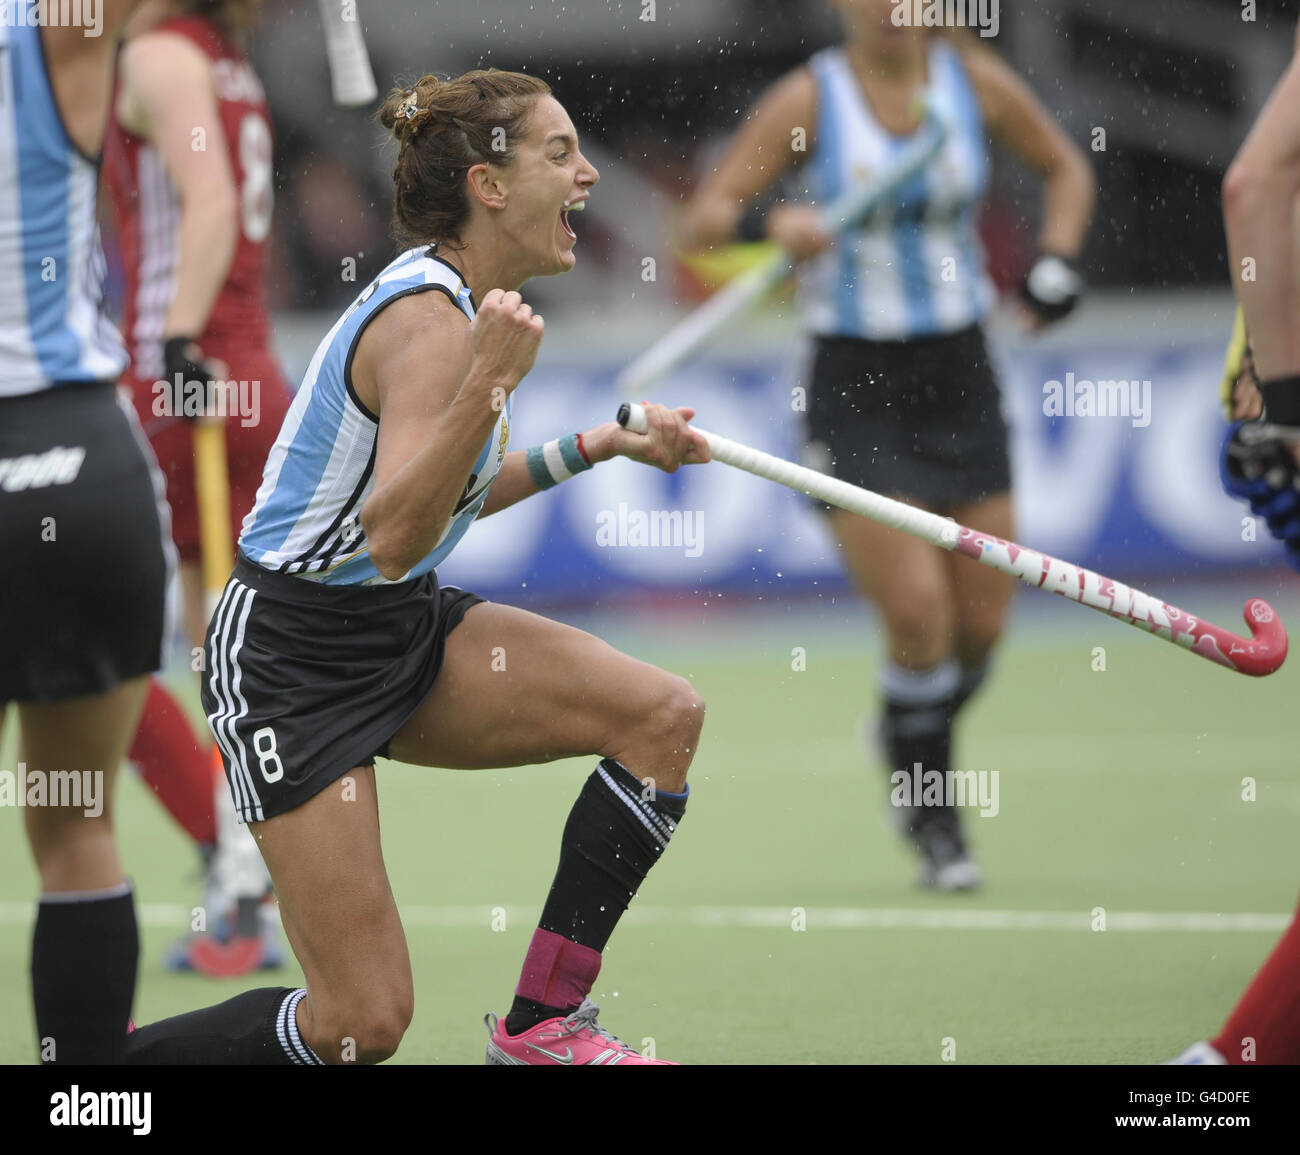 Argentina's Luciana Aymar celebrates scoring the winning goal against England during their match in the Rabo FIH Women's Champions Trophy at the Wagener Stadium, Amsterdam Stock Photo